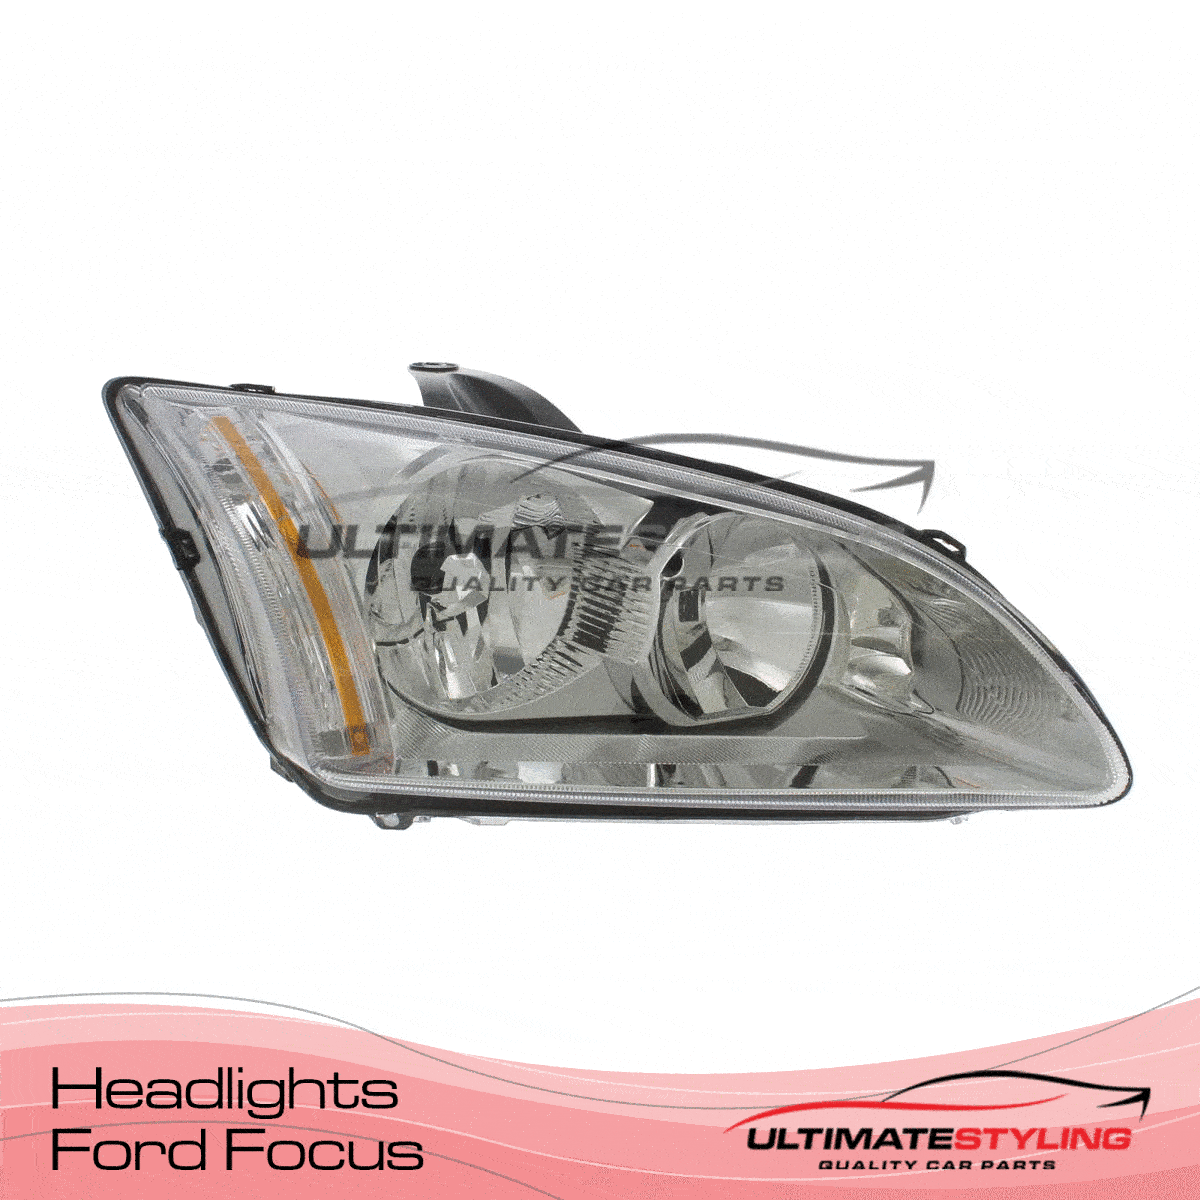 360 view of a VFord Focus Headlight